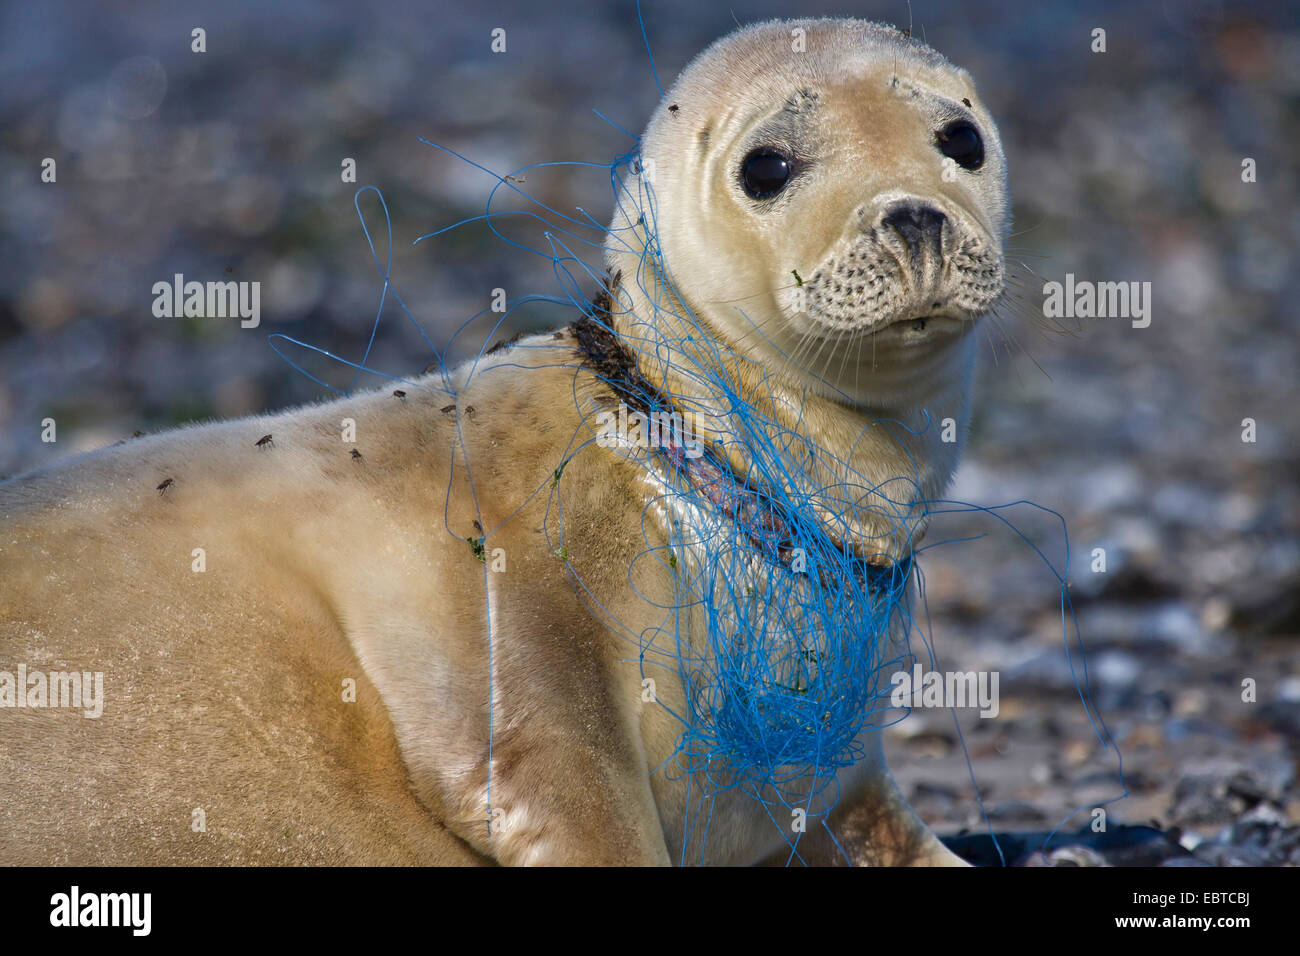 harbor seal, common seal (Phoca vitulina), kying on the beach, hurt by fishernet, Germany, Schleswig-Holstein, Heligoland Stock Photo